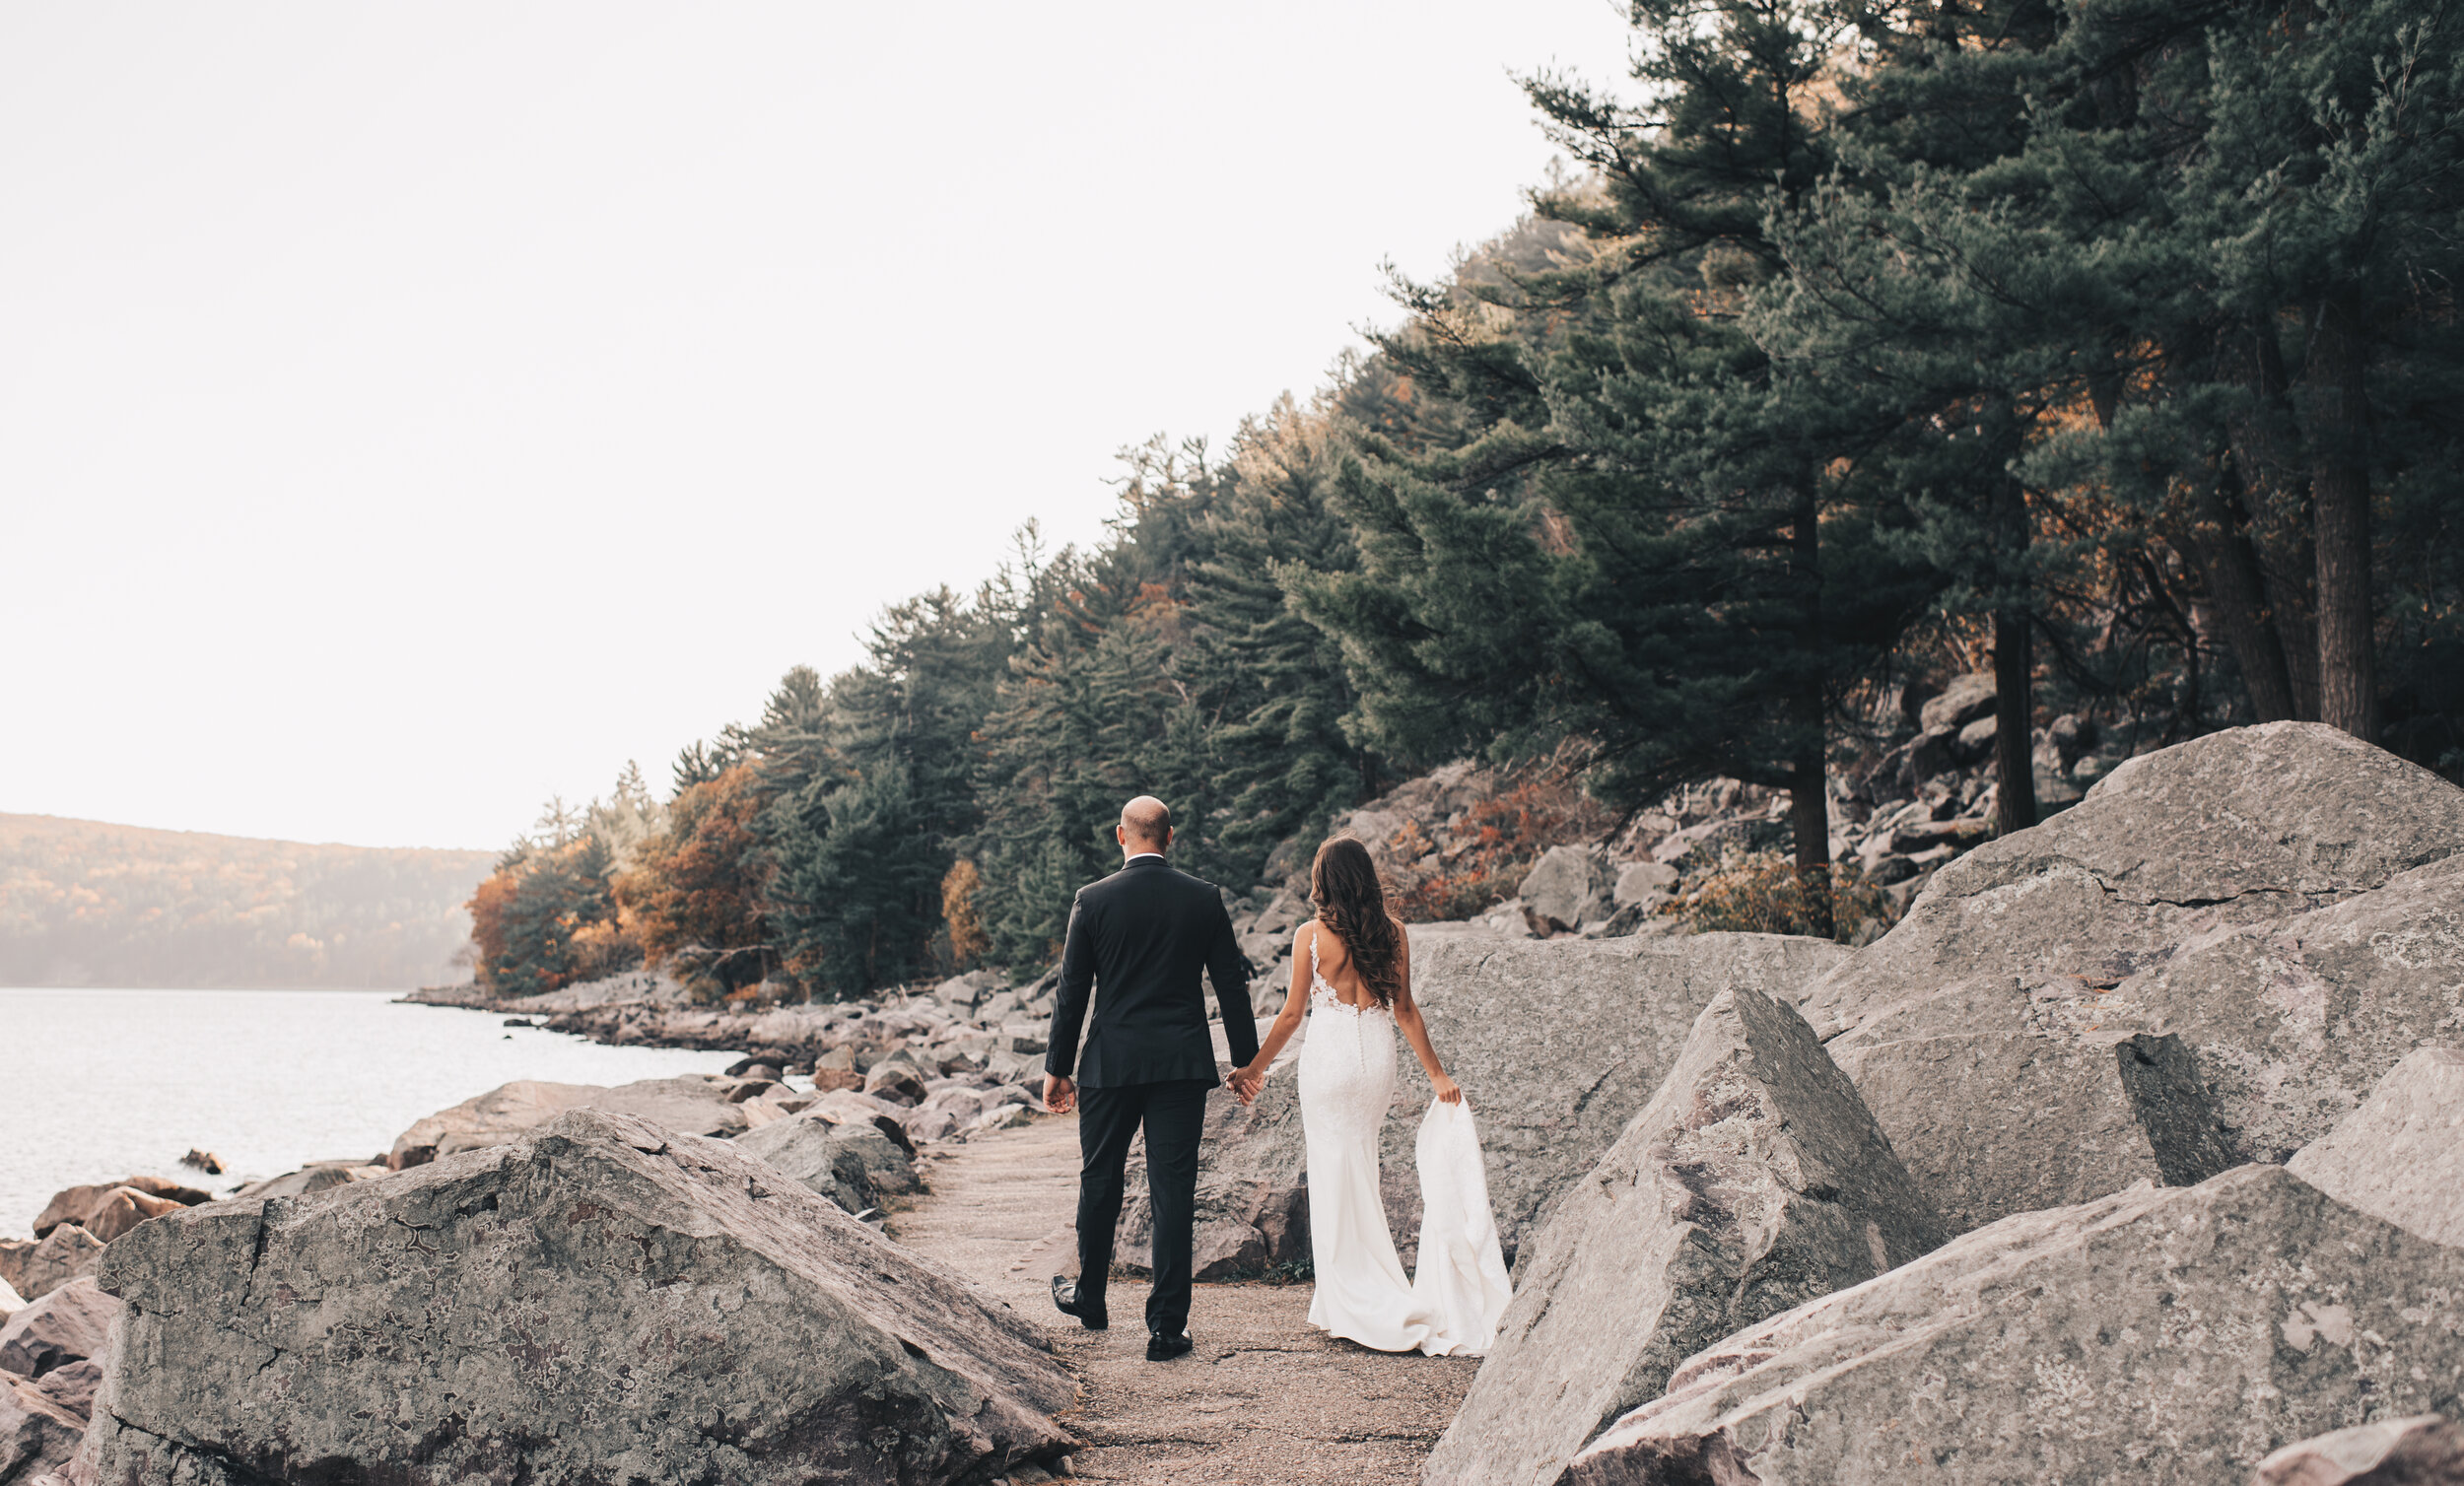 Devils Lake State Park Wedding, Devils Lake State Park Elopement, Baraboo Wisconsin Wedding, Bride and Groom Beach Photos, Bride and Groom Mountain Photos, Midwest Adventurous Wedding